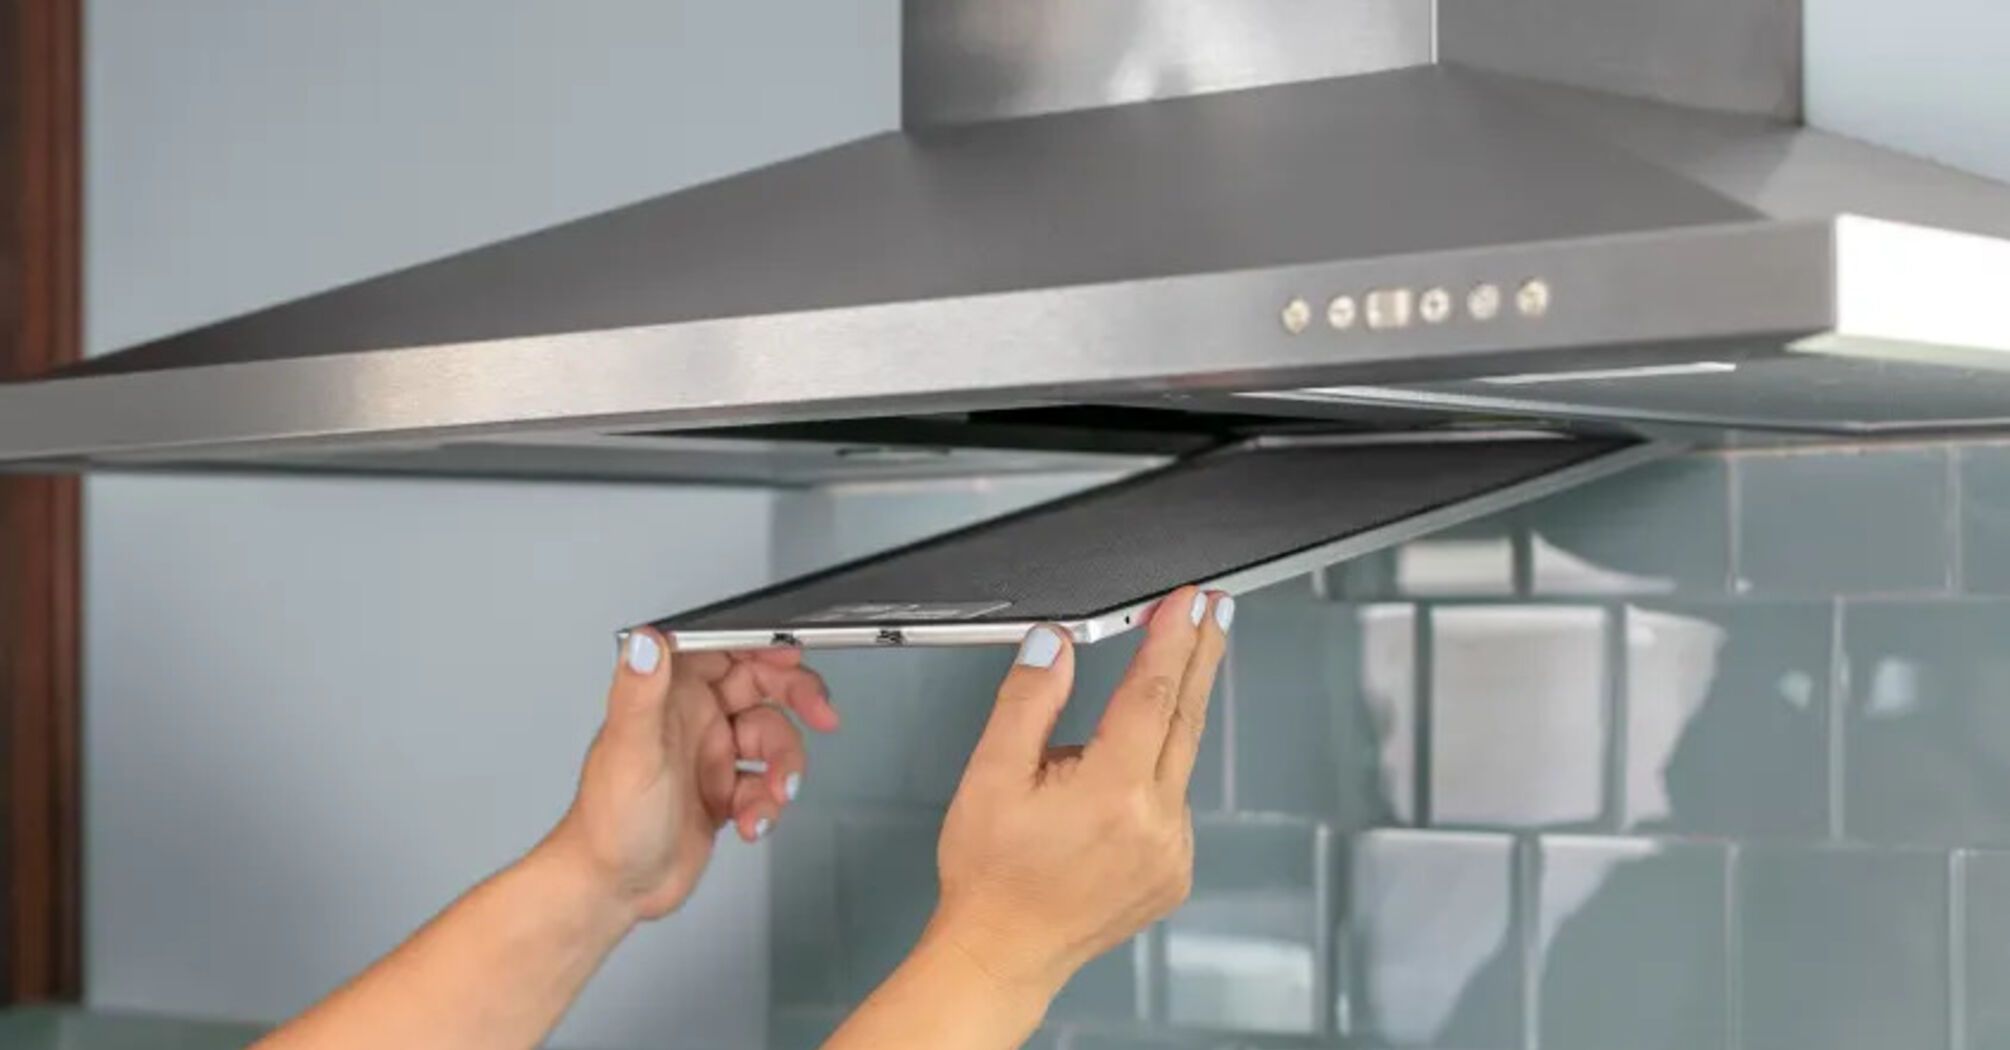 How to easily clean your kitchen hood from grease and dirt